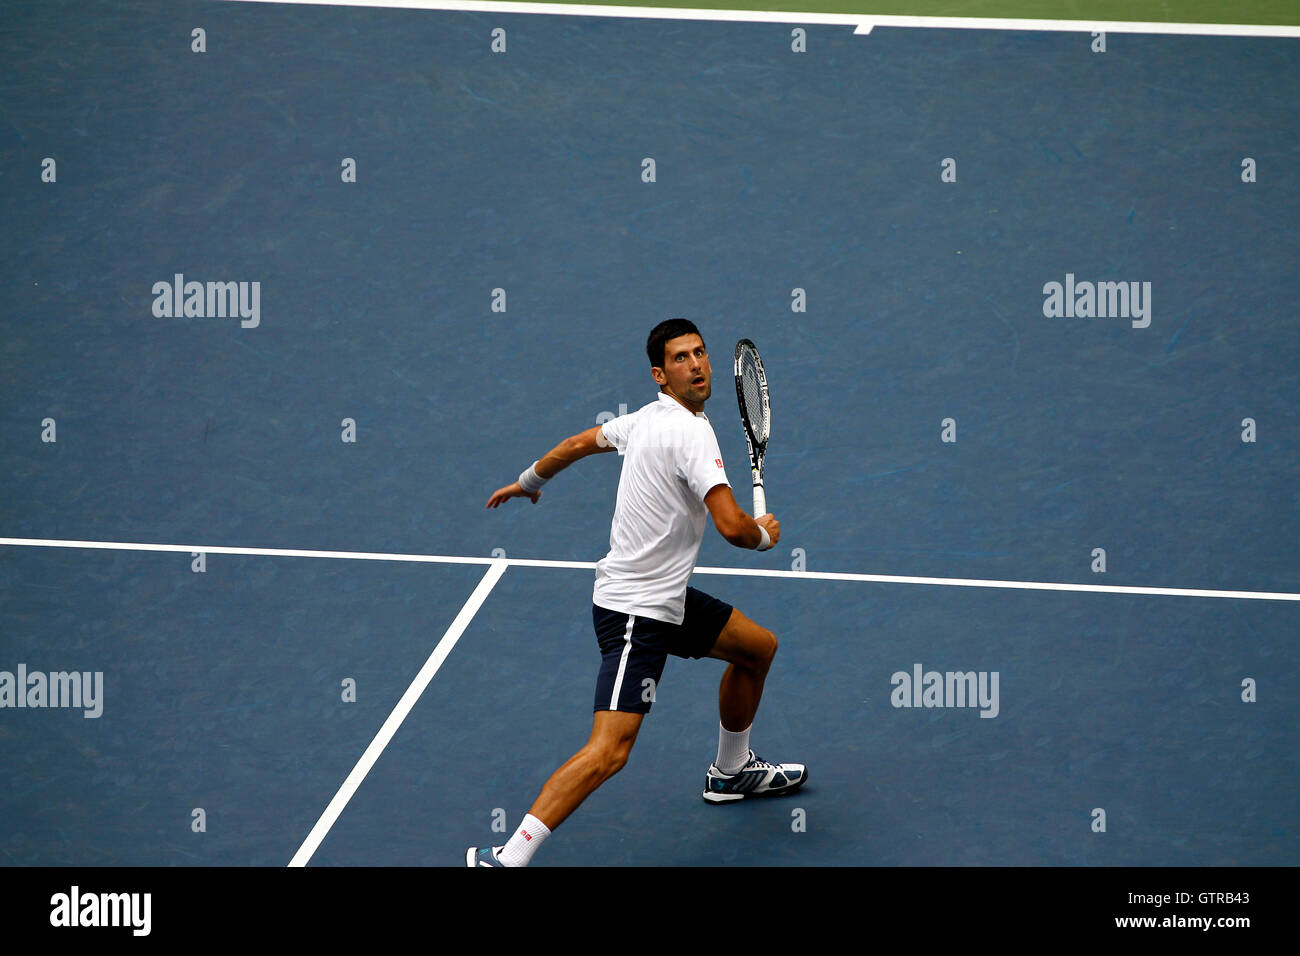 New York, United States. 09th Sep, 2016. Novak Djokovic tracks a lob during his semi final match against Gael Monfils of France at the United States Open Tennis Championships at Flushing Meadows, New York on Friday, September 9th. Djokovic won the match in four sets to advance to the final Credit: © Adam Stoltman/Alamy Live News  Stock Photo